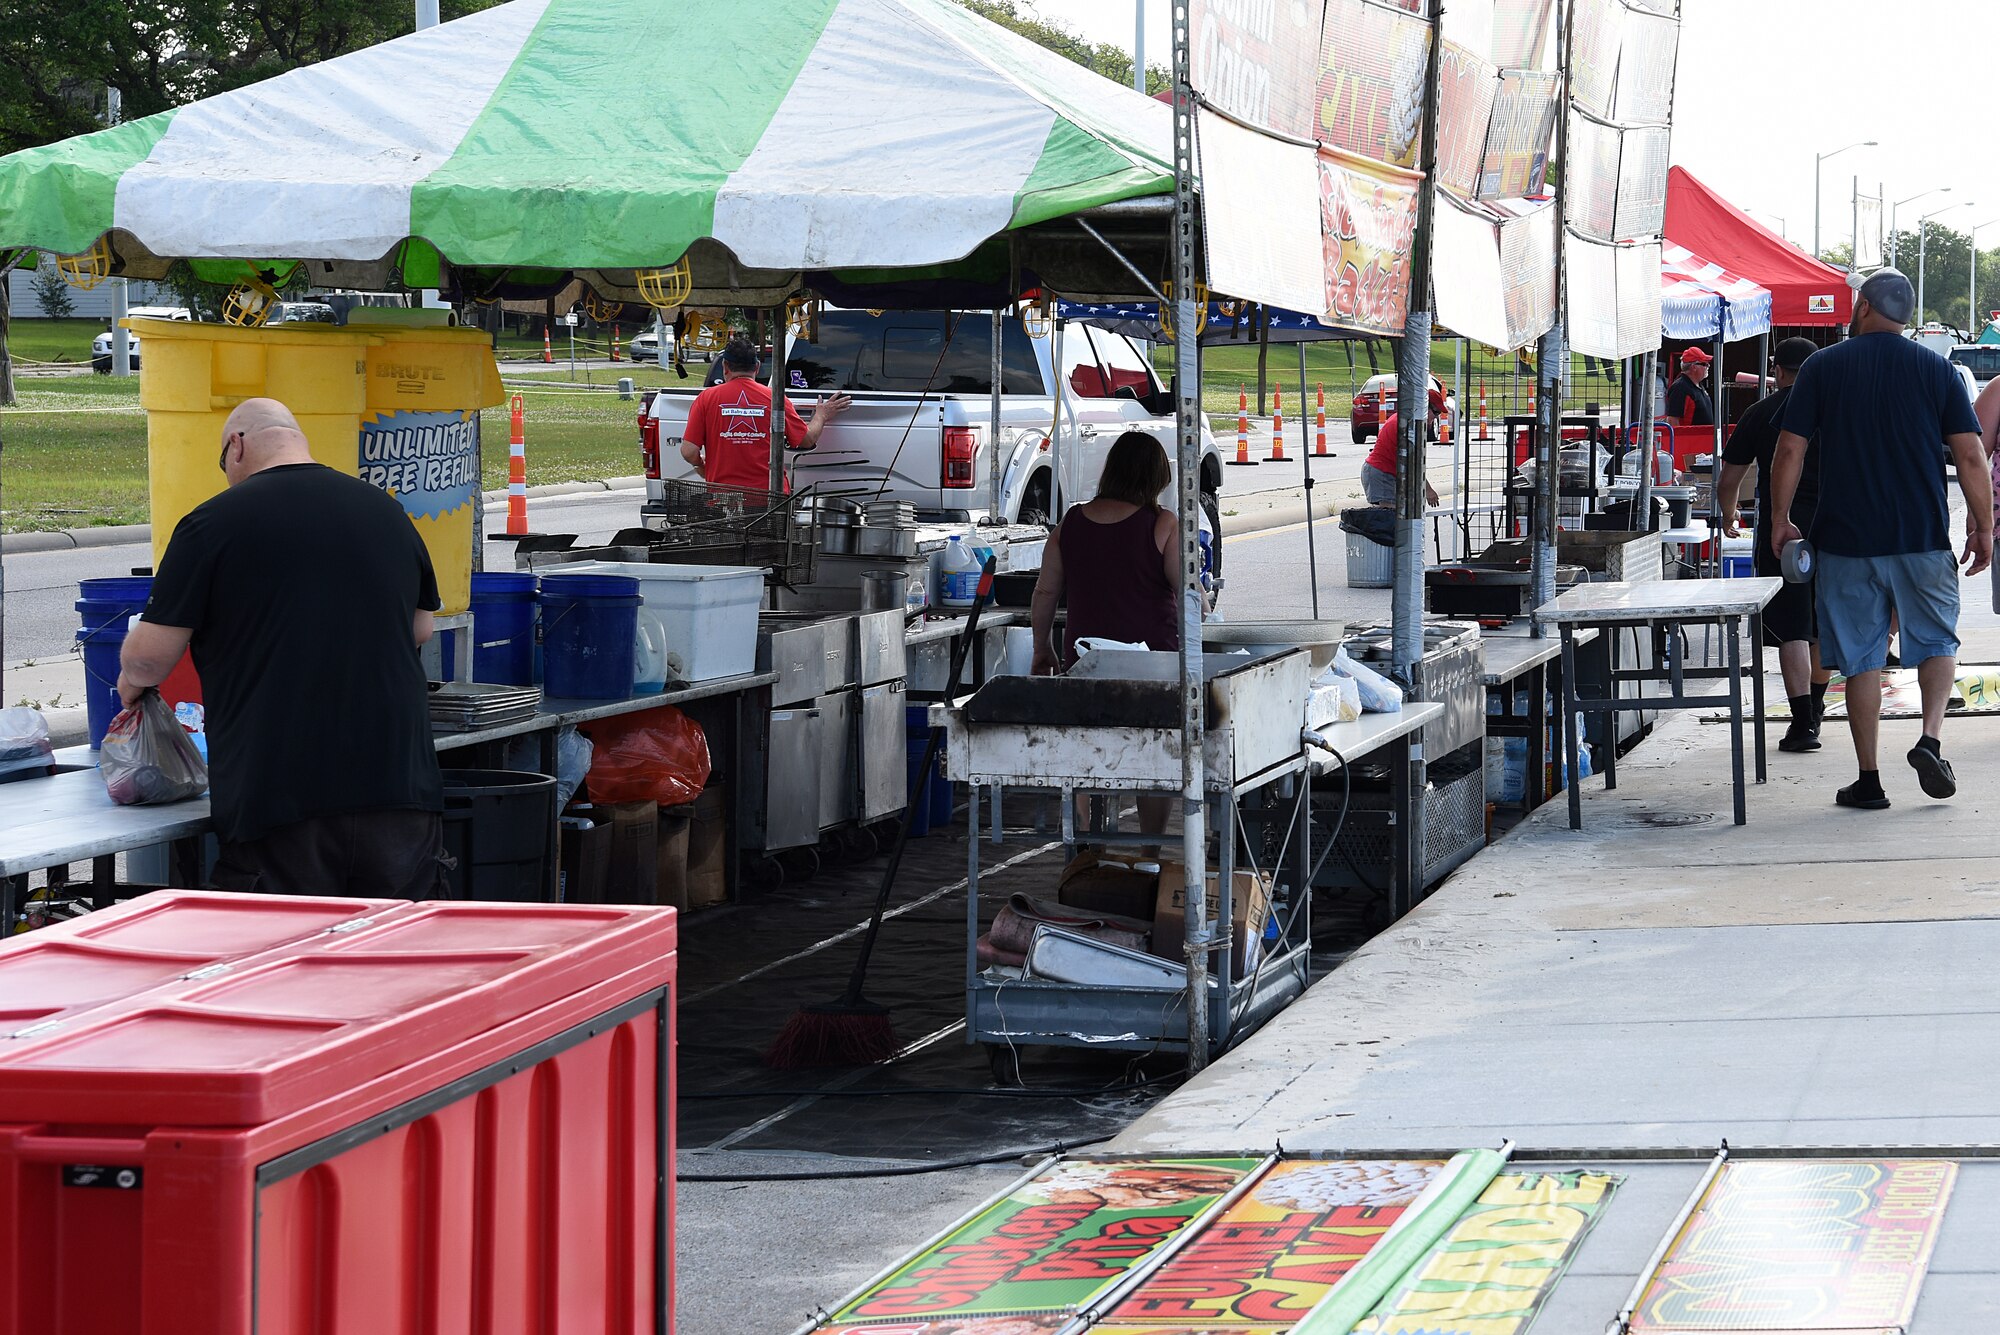 Food vendors set up their tents in preparation for the Keesler and Biloxi Air and Space Show in Biloxi, Mississippi, May 3, 2019. Thunder Over the Sound is a unique, one-of-a-kind event where a base and its surrounding city jointly host one air show geographically separated. (U.S. Air Force photo by Senior Airman Jenay Randolph)